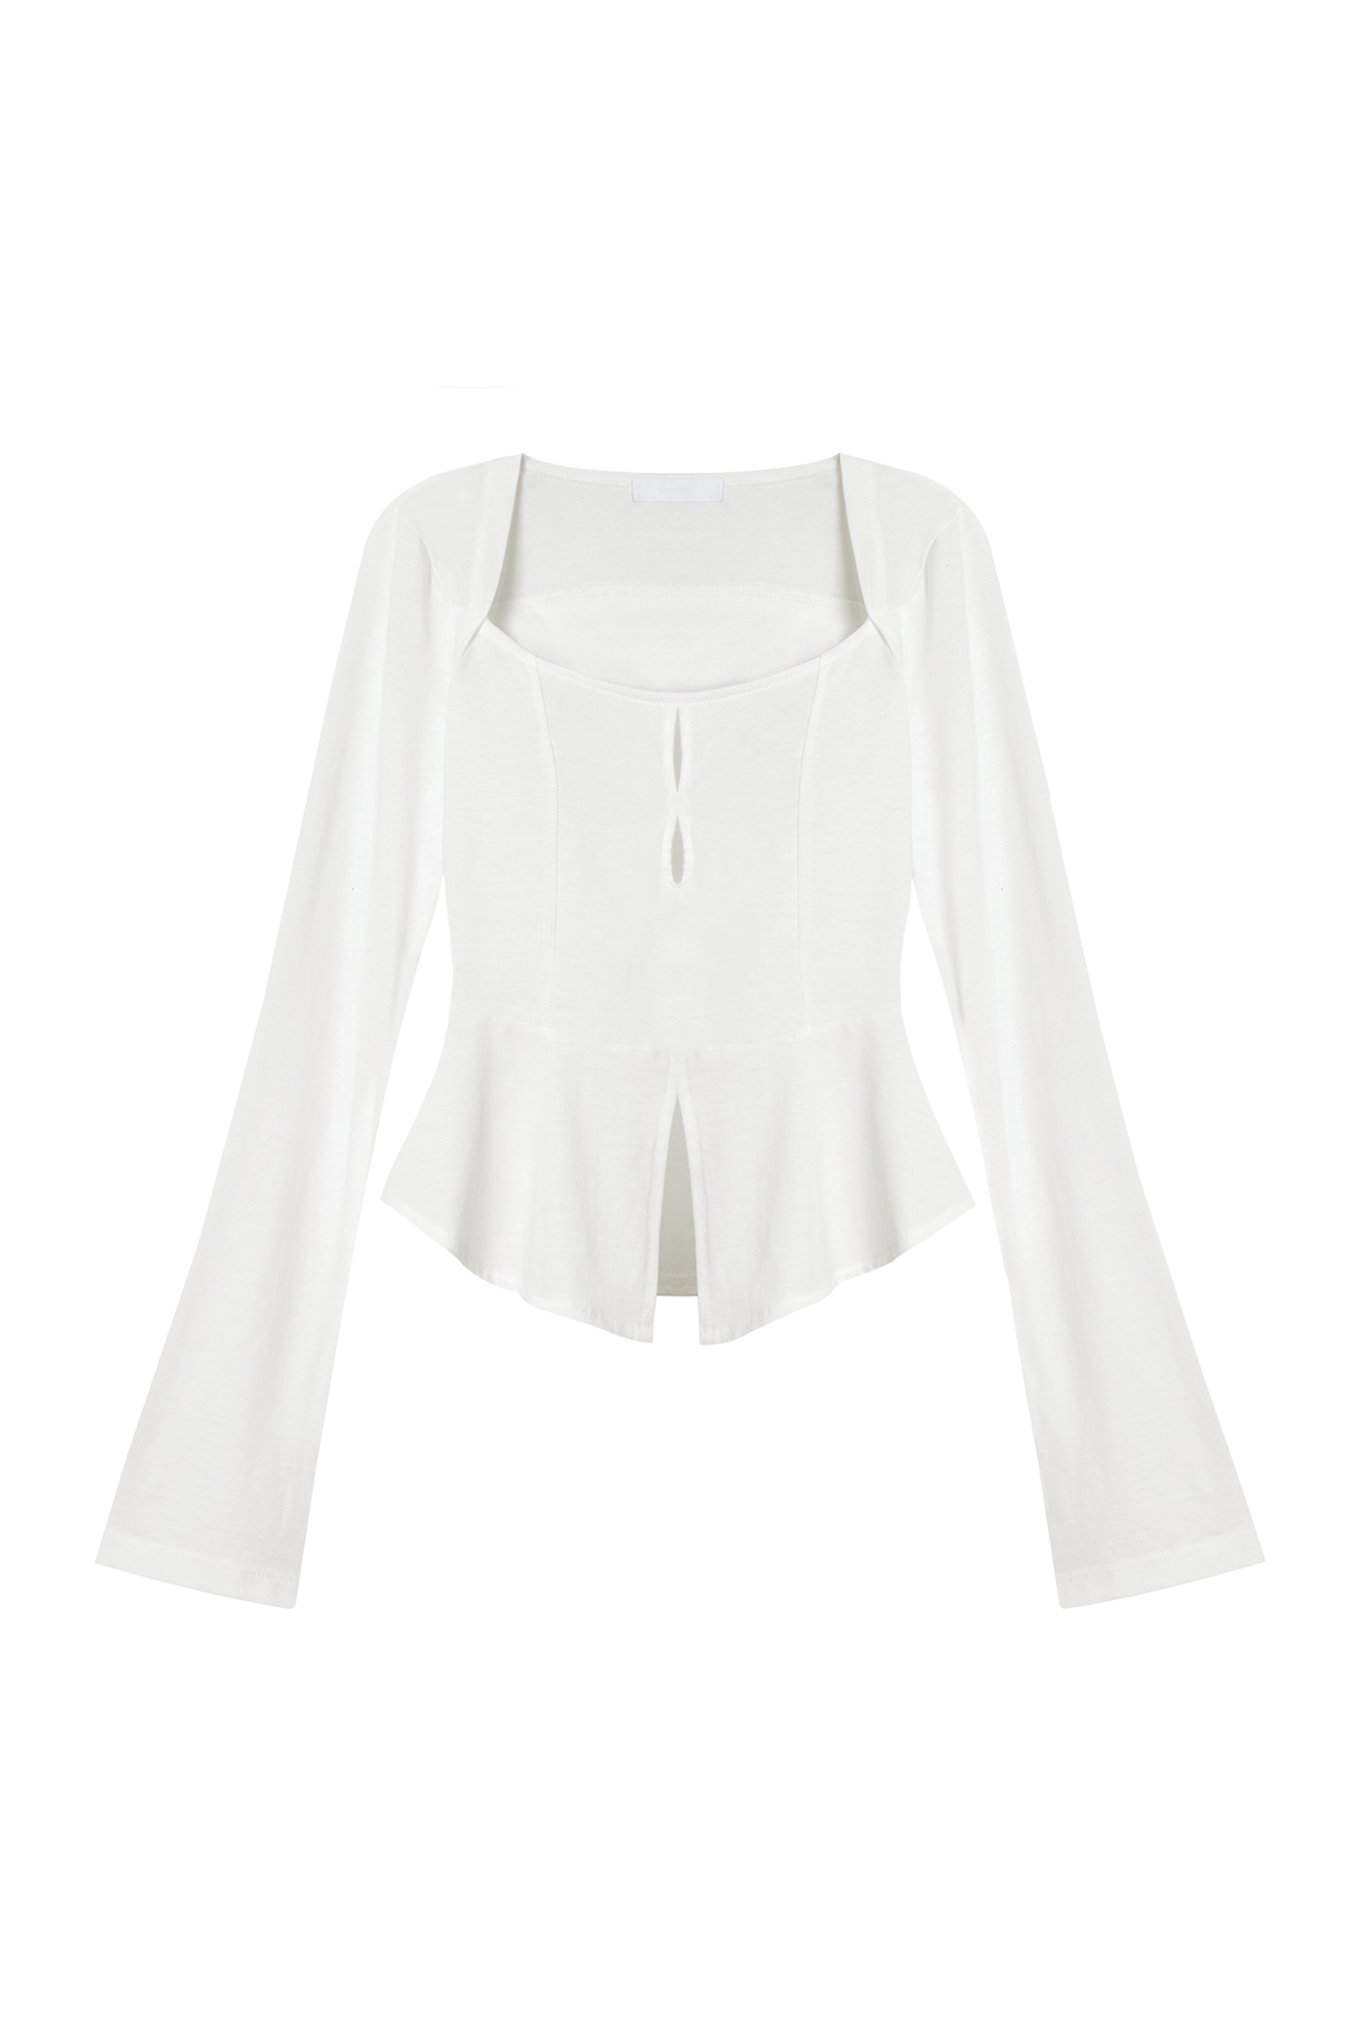 DAPHNE FLARED TOP [WHITE]